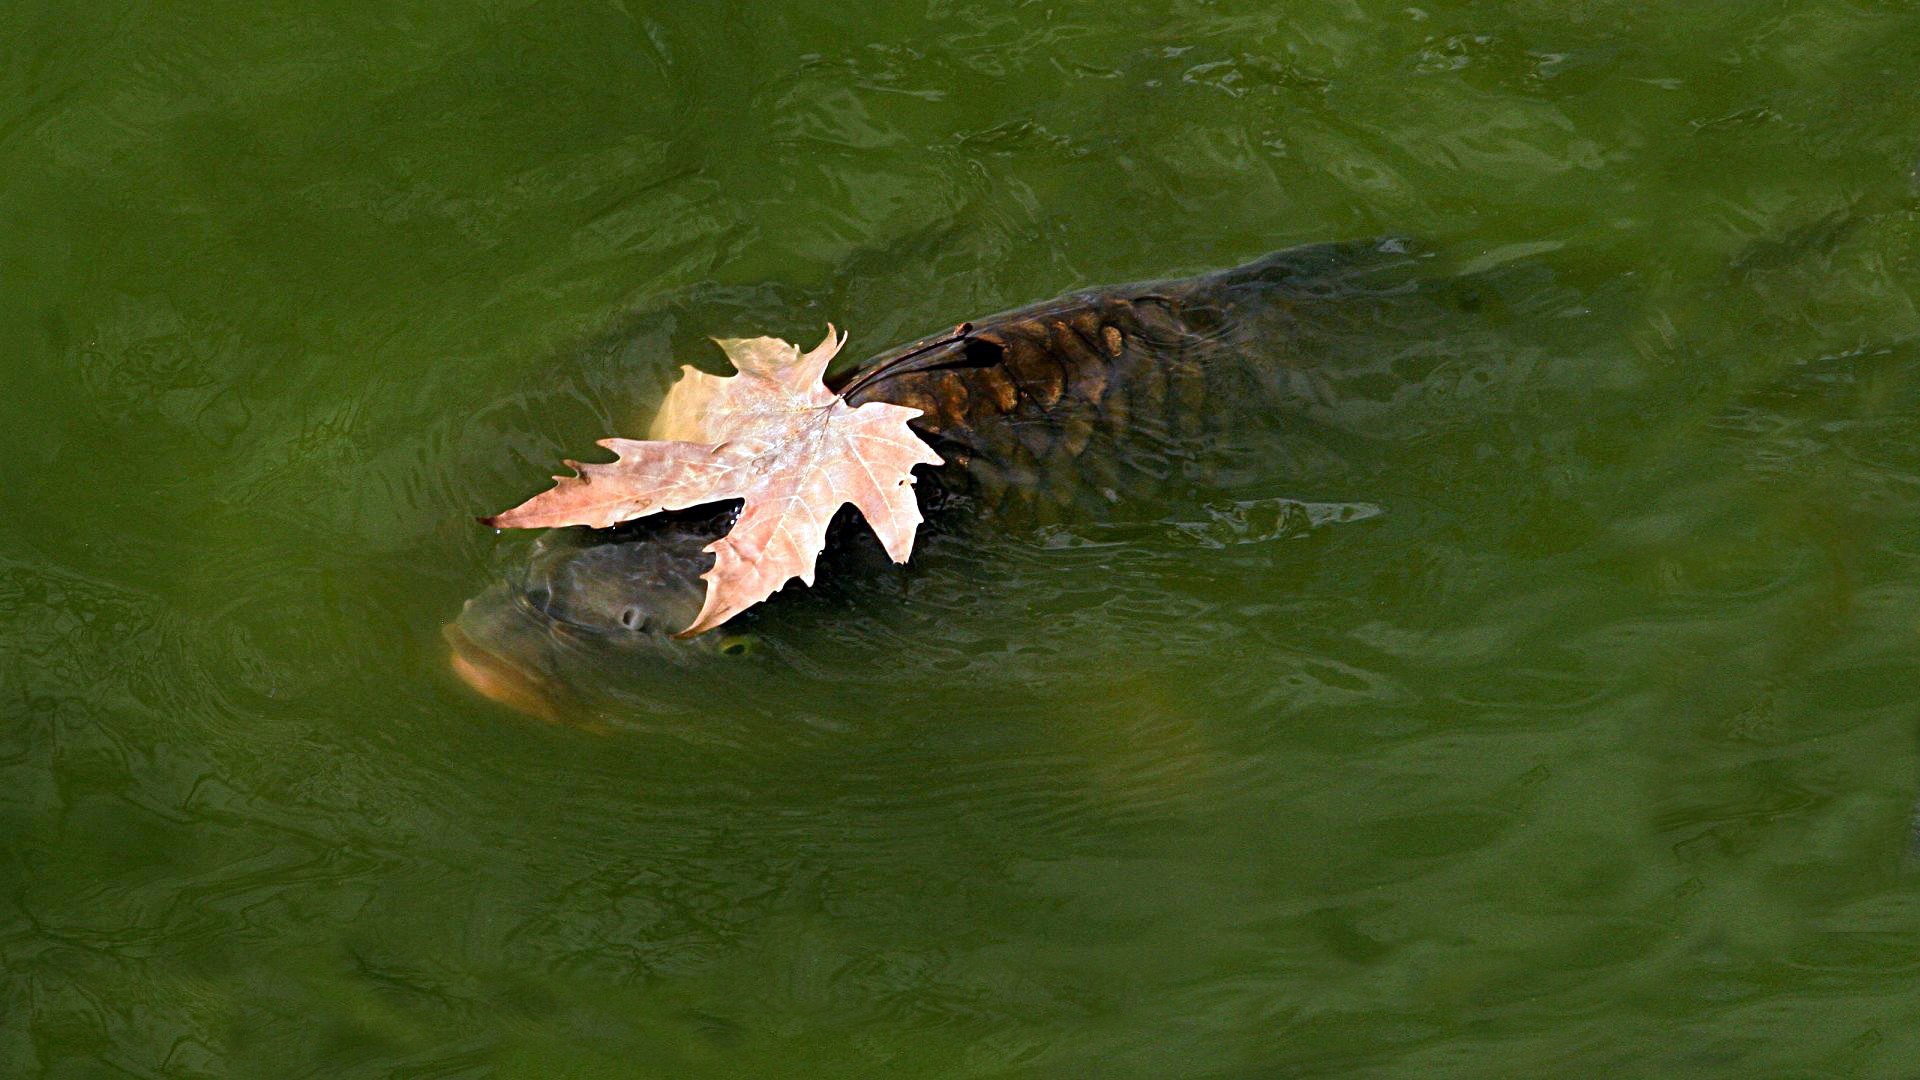 General 1920x1080 animals fish carp leaves fallen leaves water nature in water